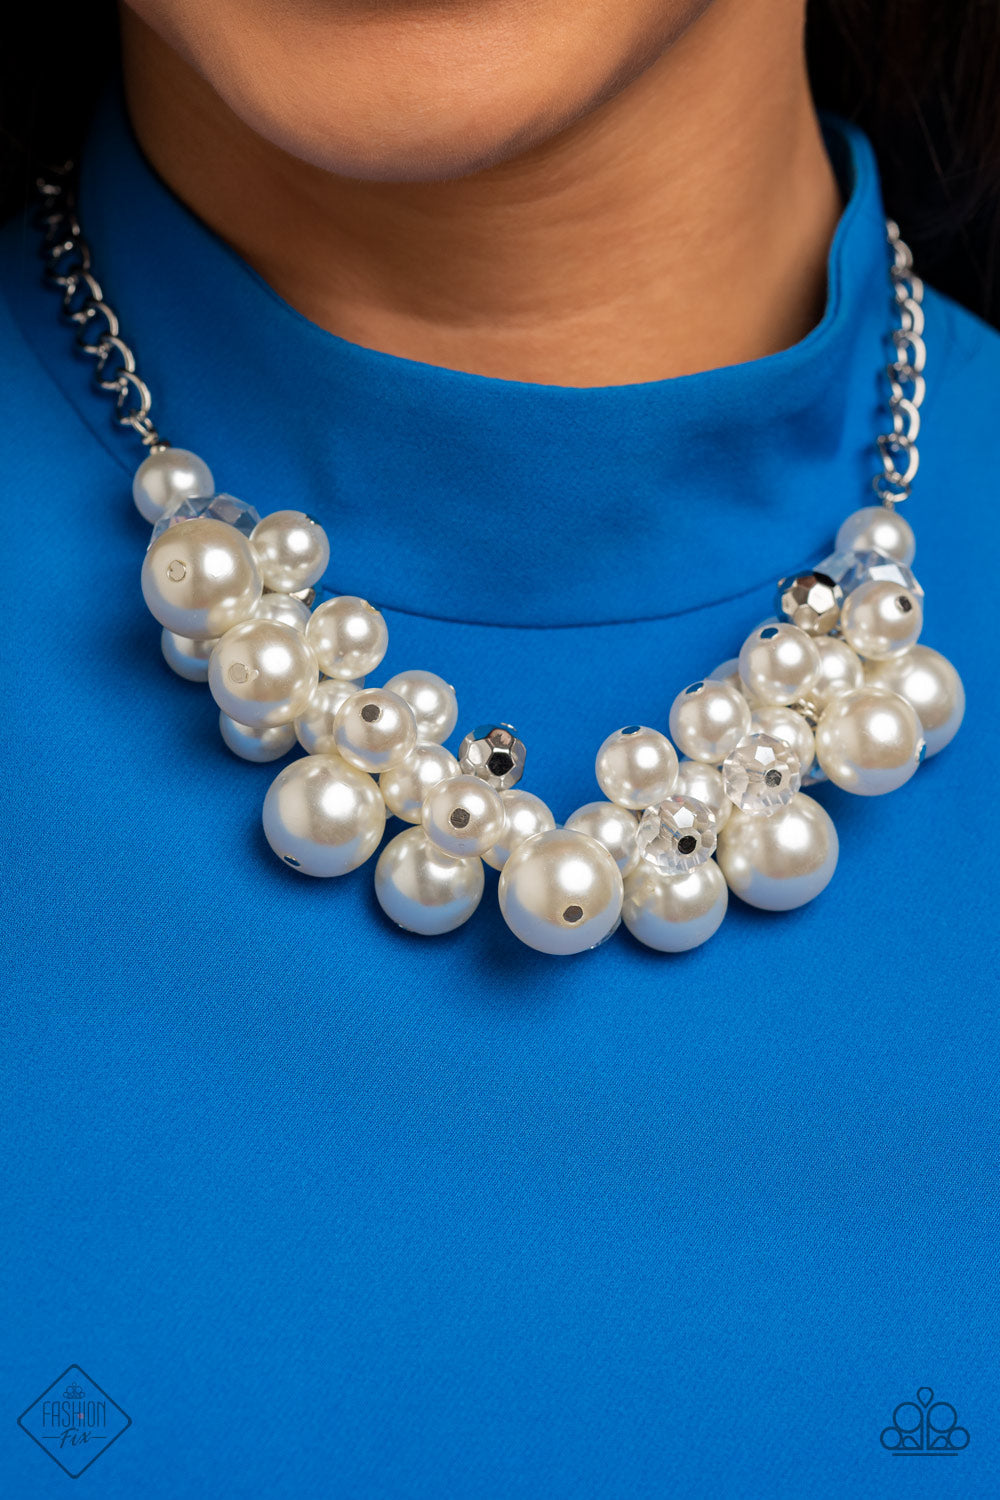 Pearl Accessories To Go With Any Look